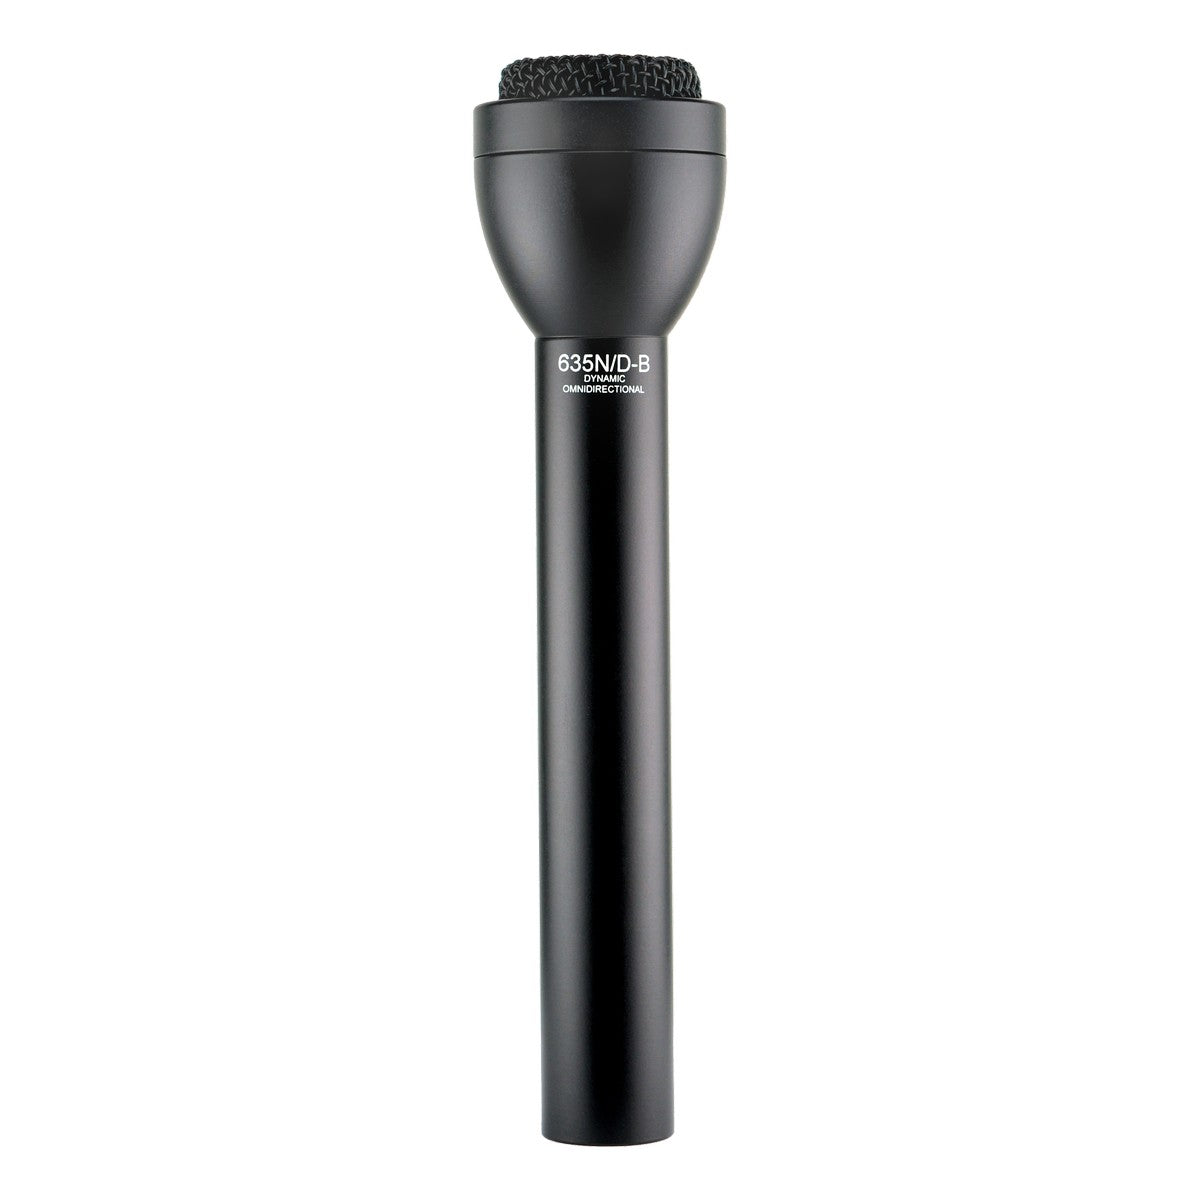 Electro-Voice 635N/D-B Classic Handheld Interview Microphone with N/DYM Capsule